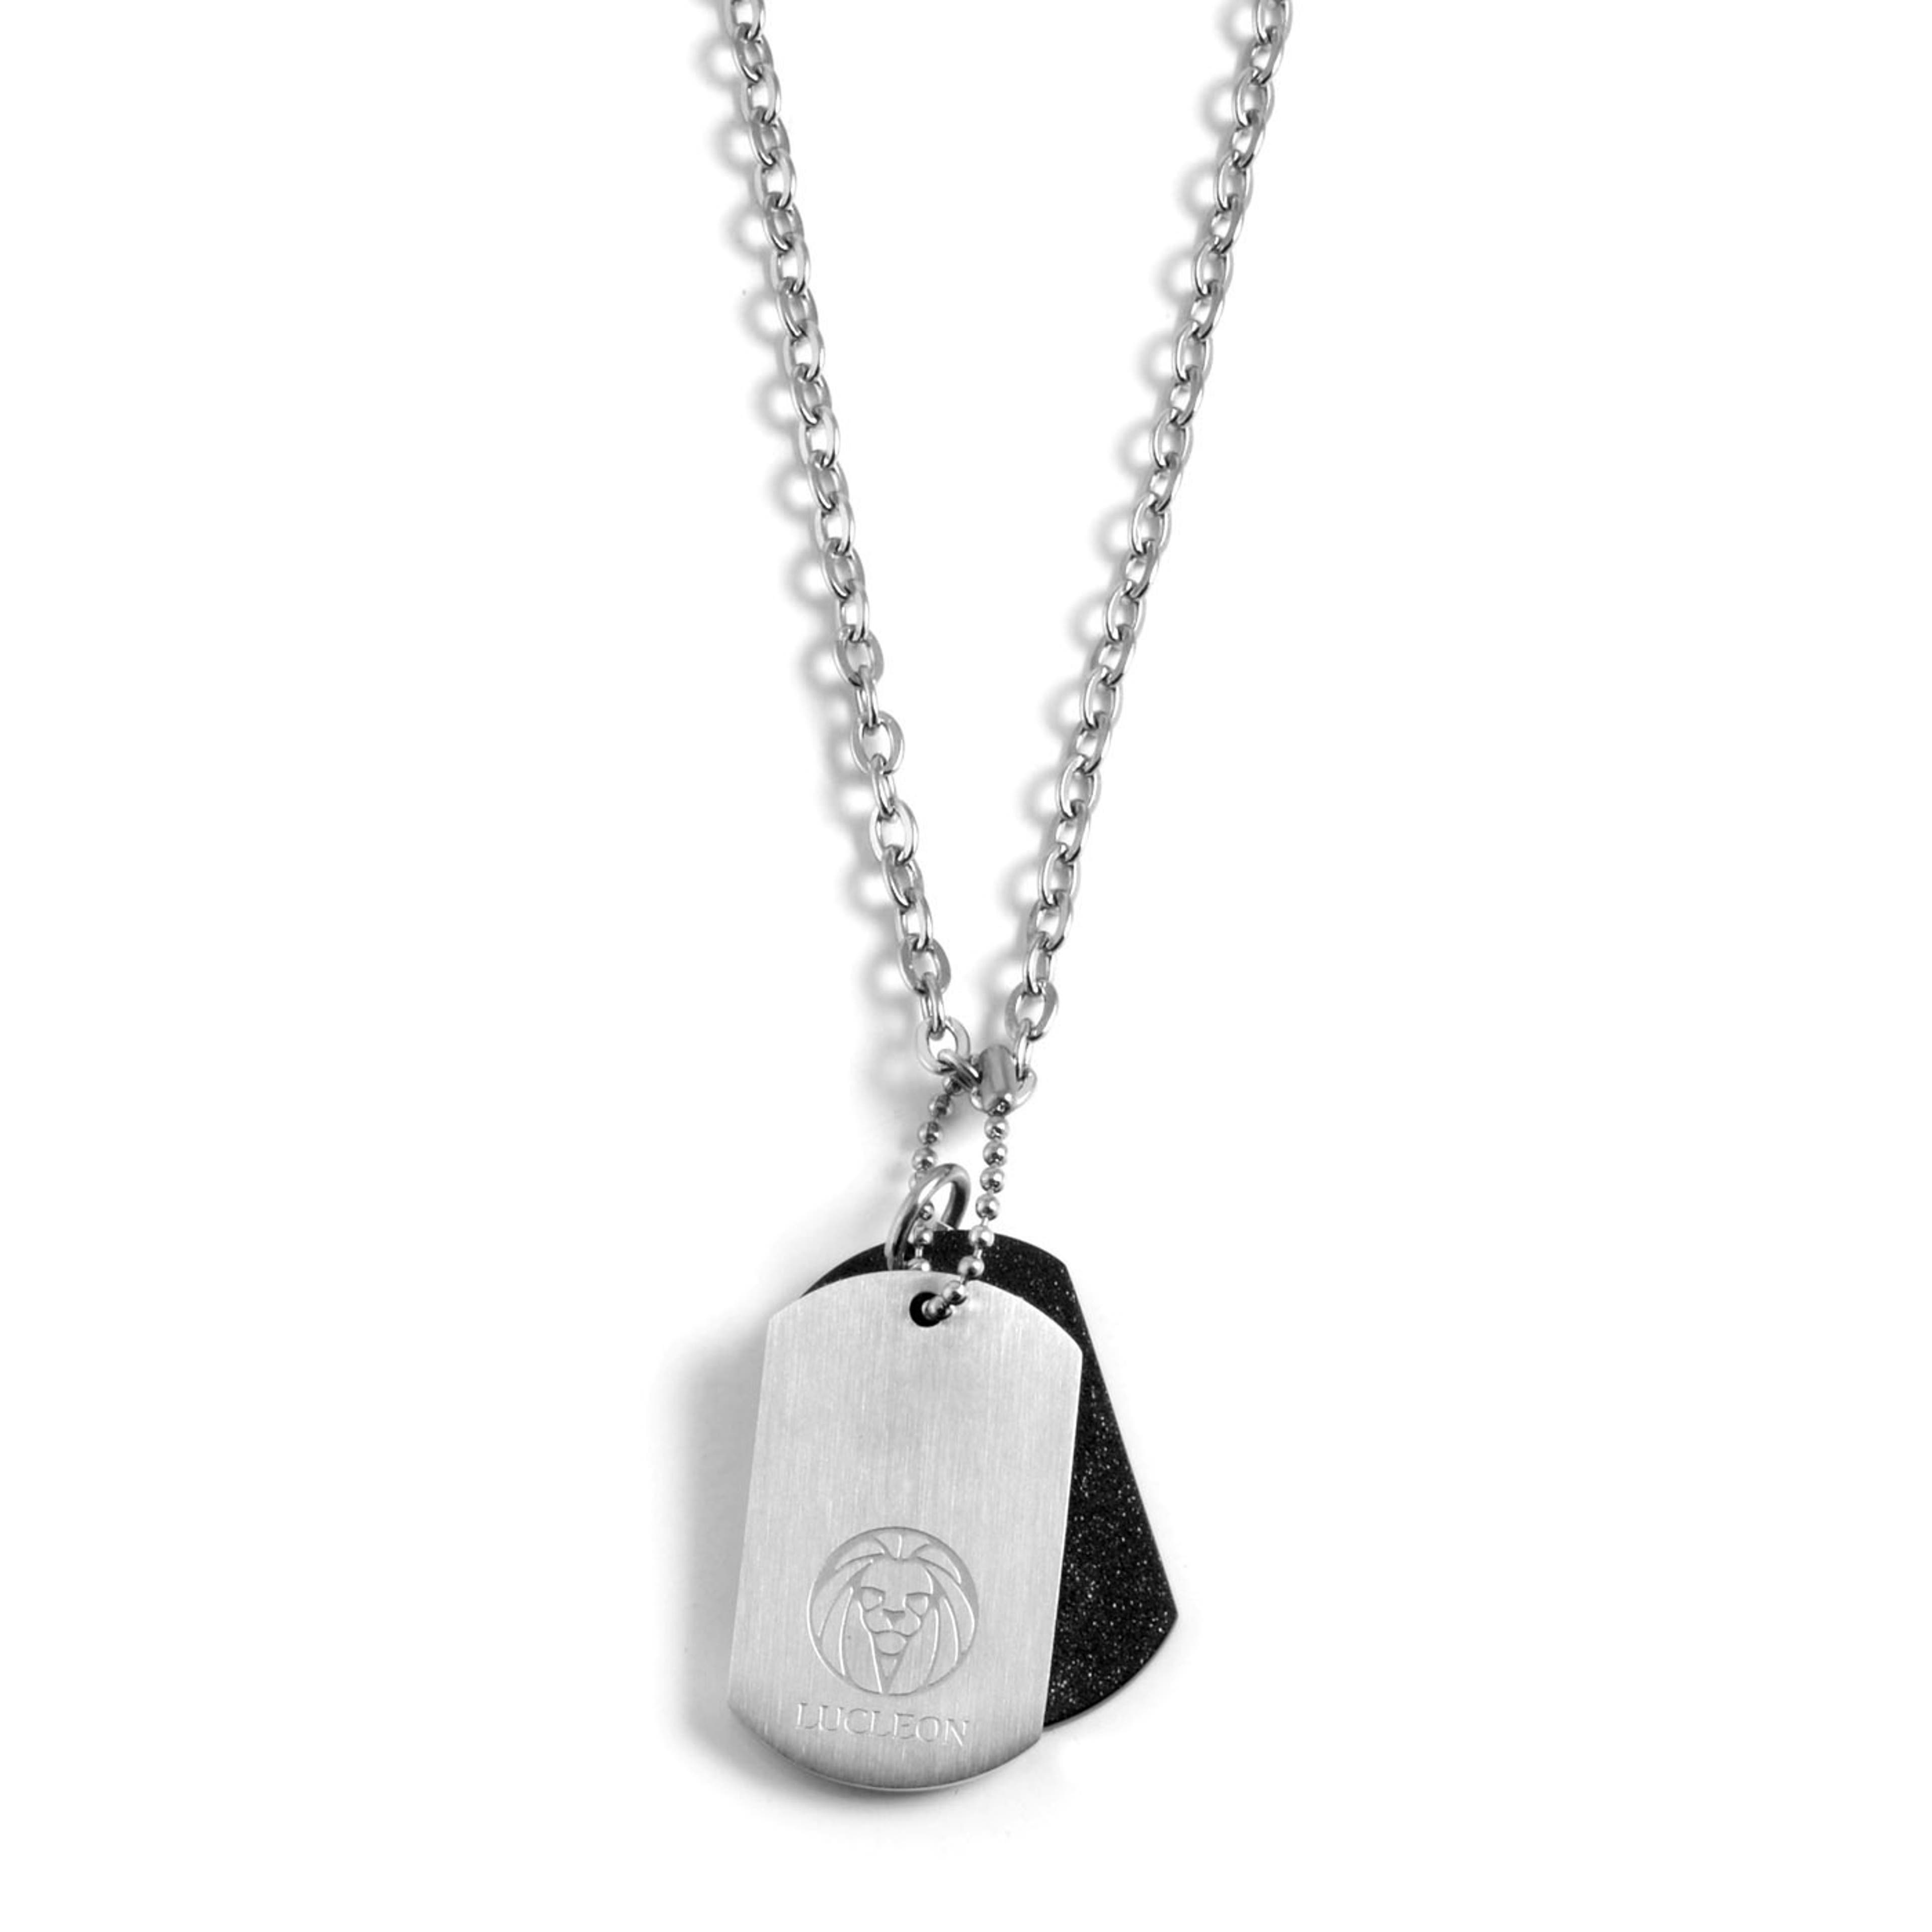 Lucleon Double Dog Tag Necklace